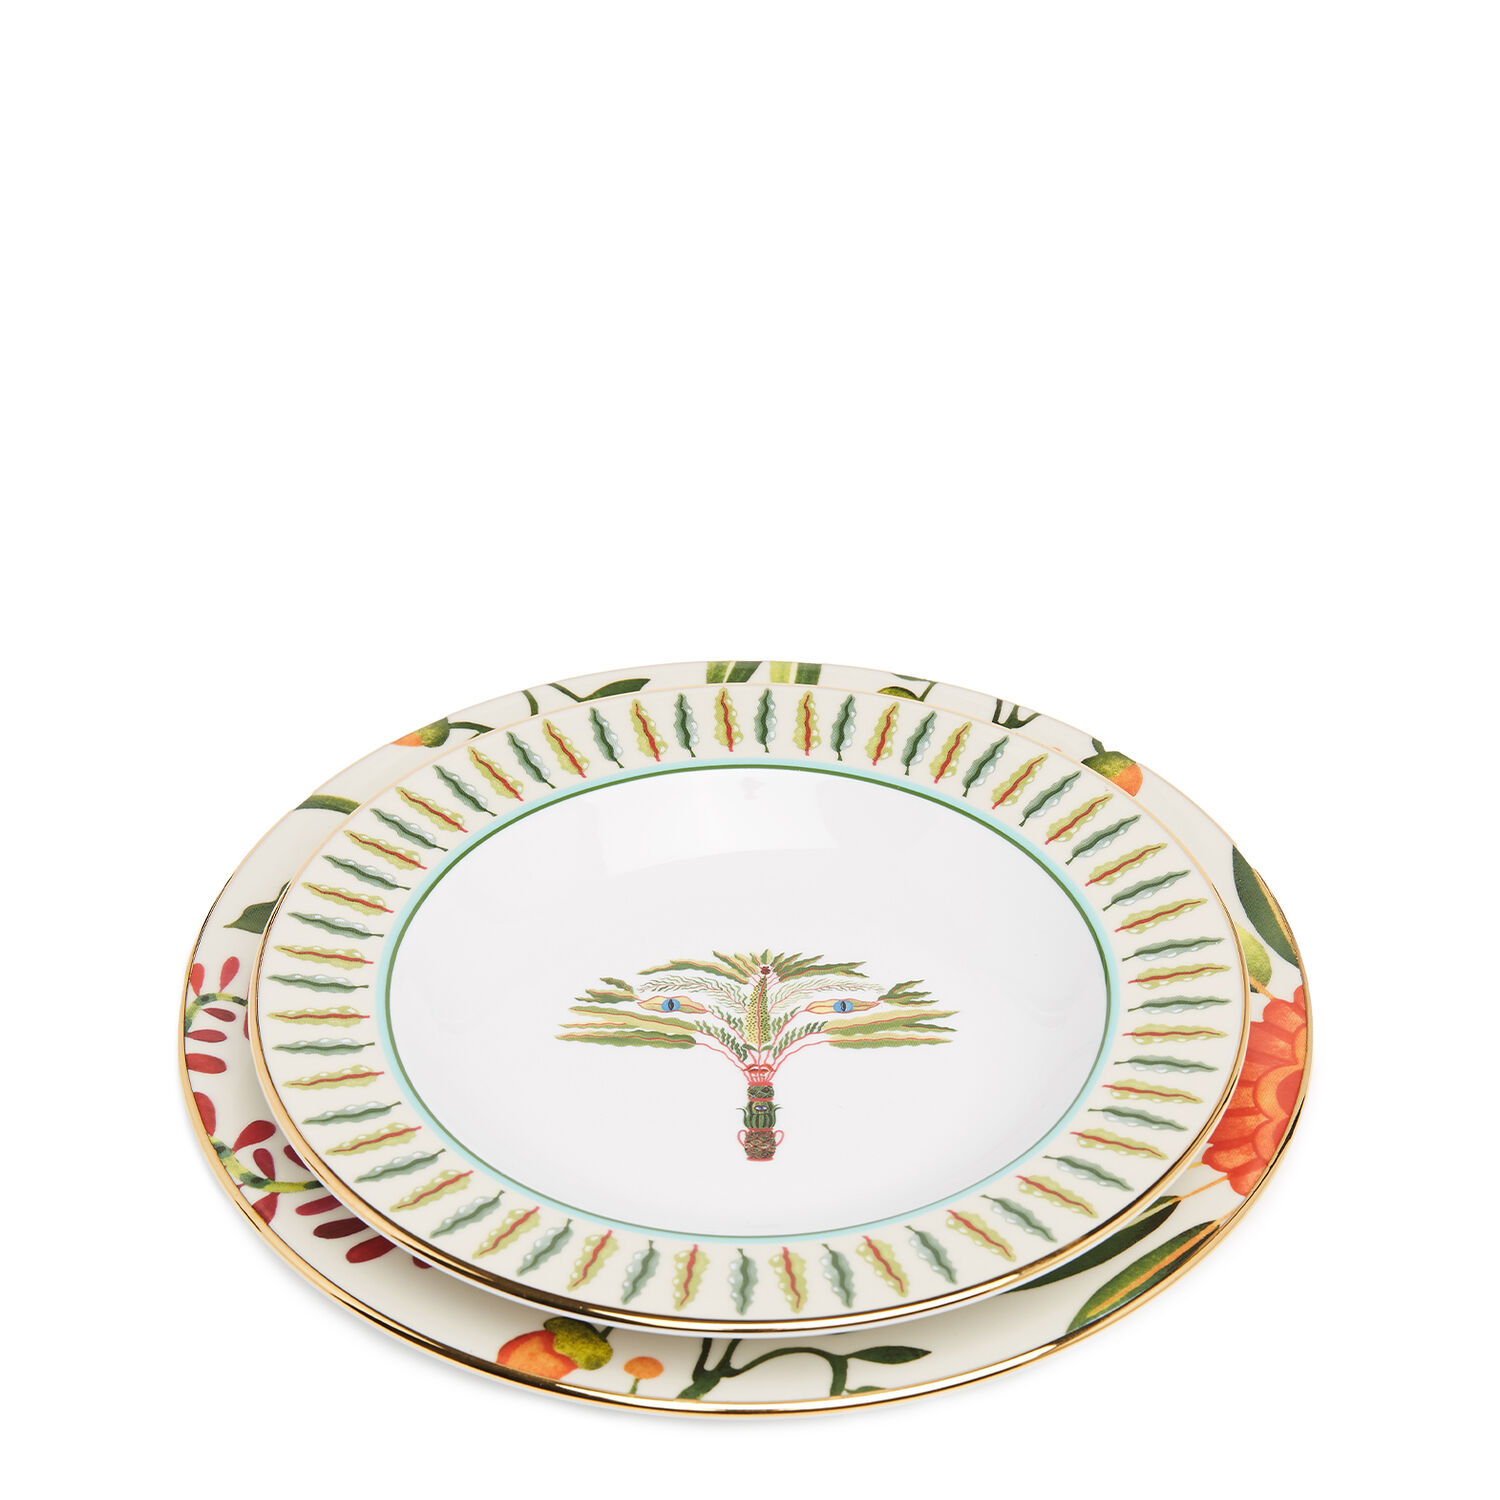 LA DOUBLEJ SOUP AND DINNER SET OF 2